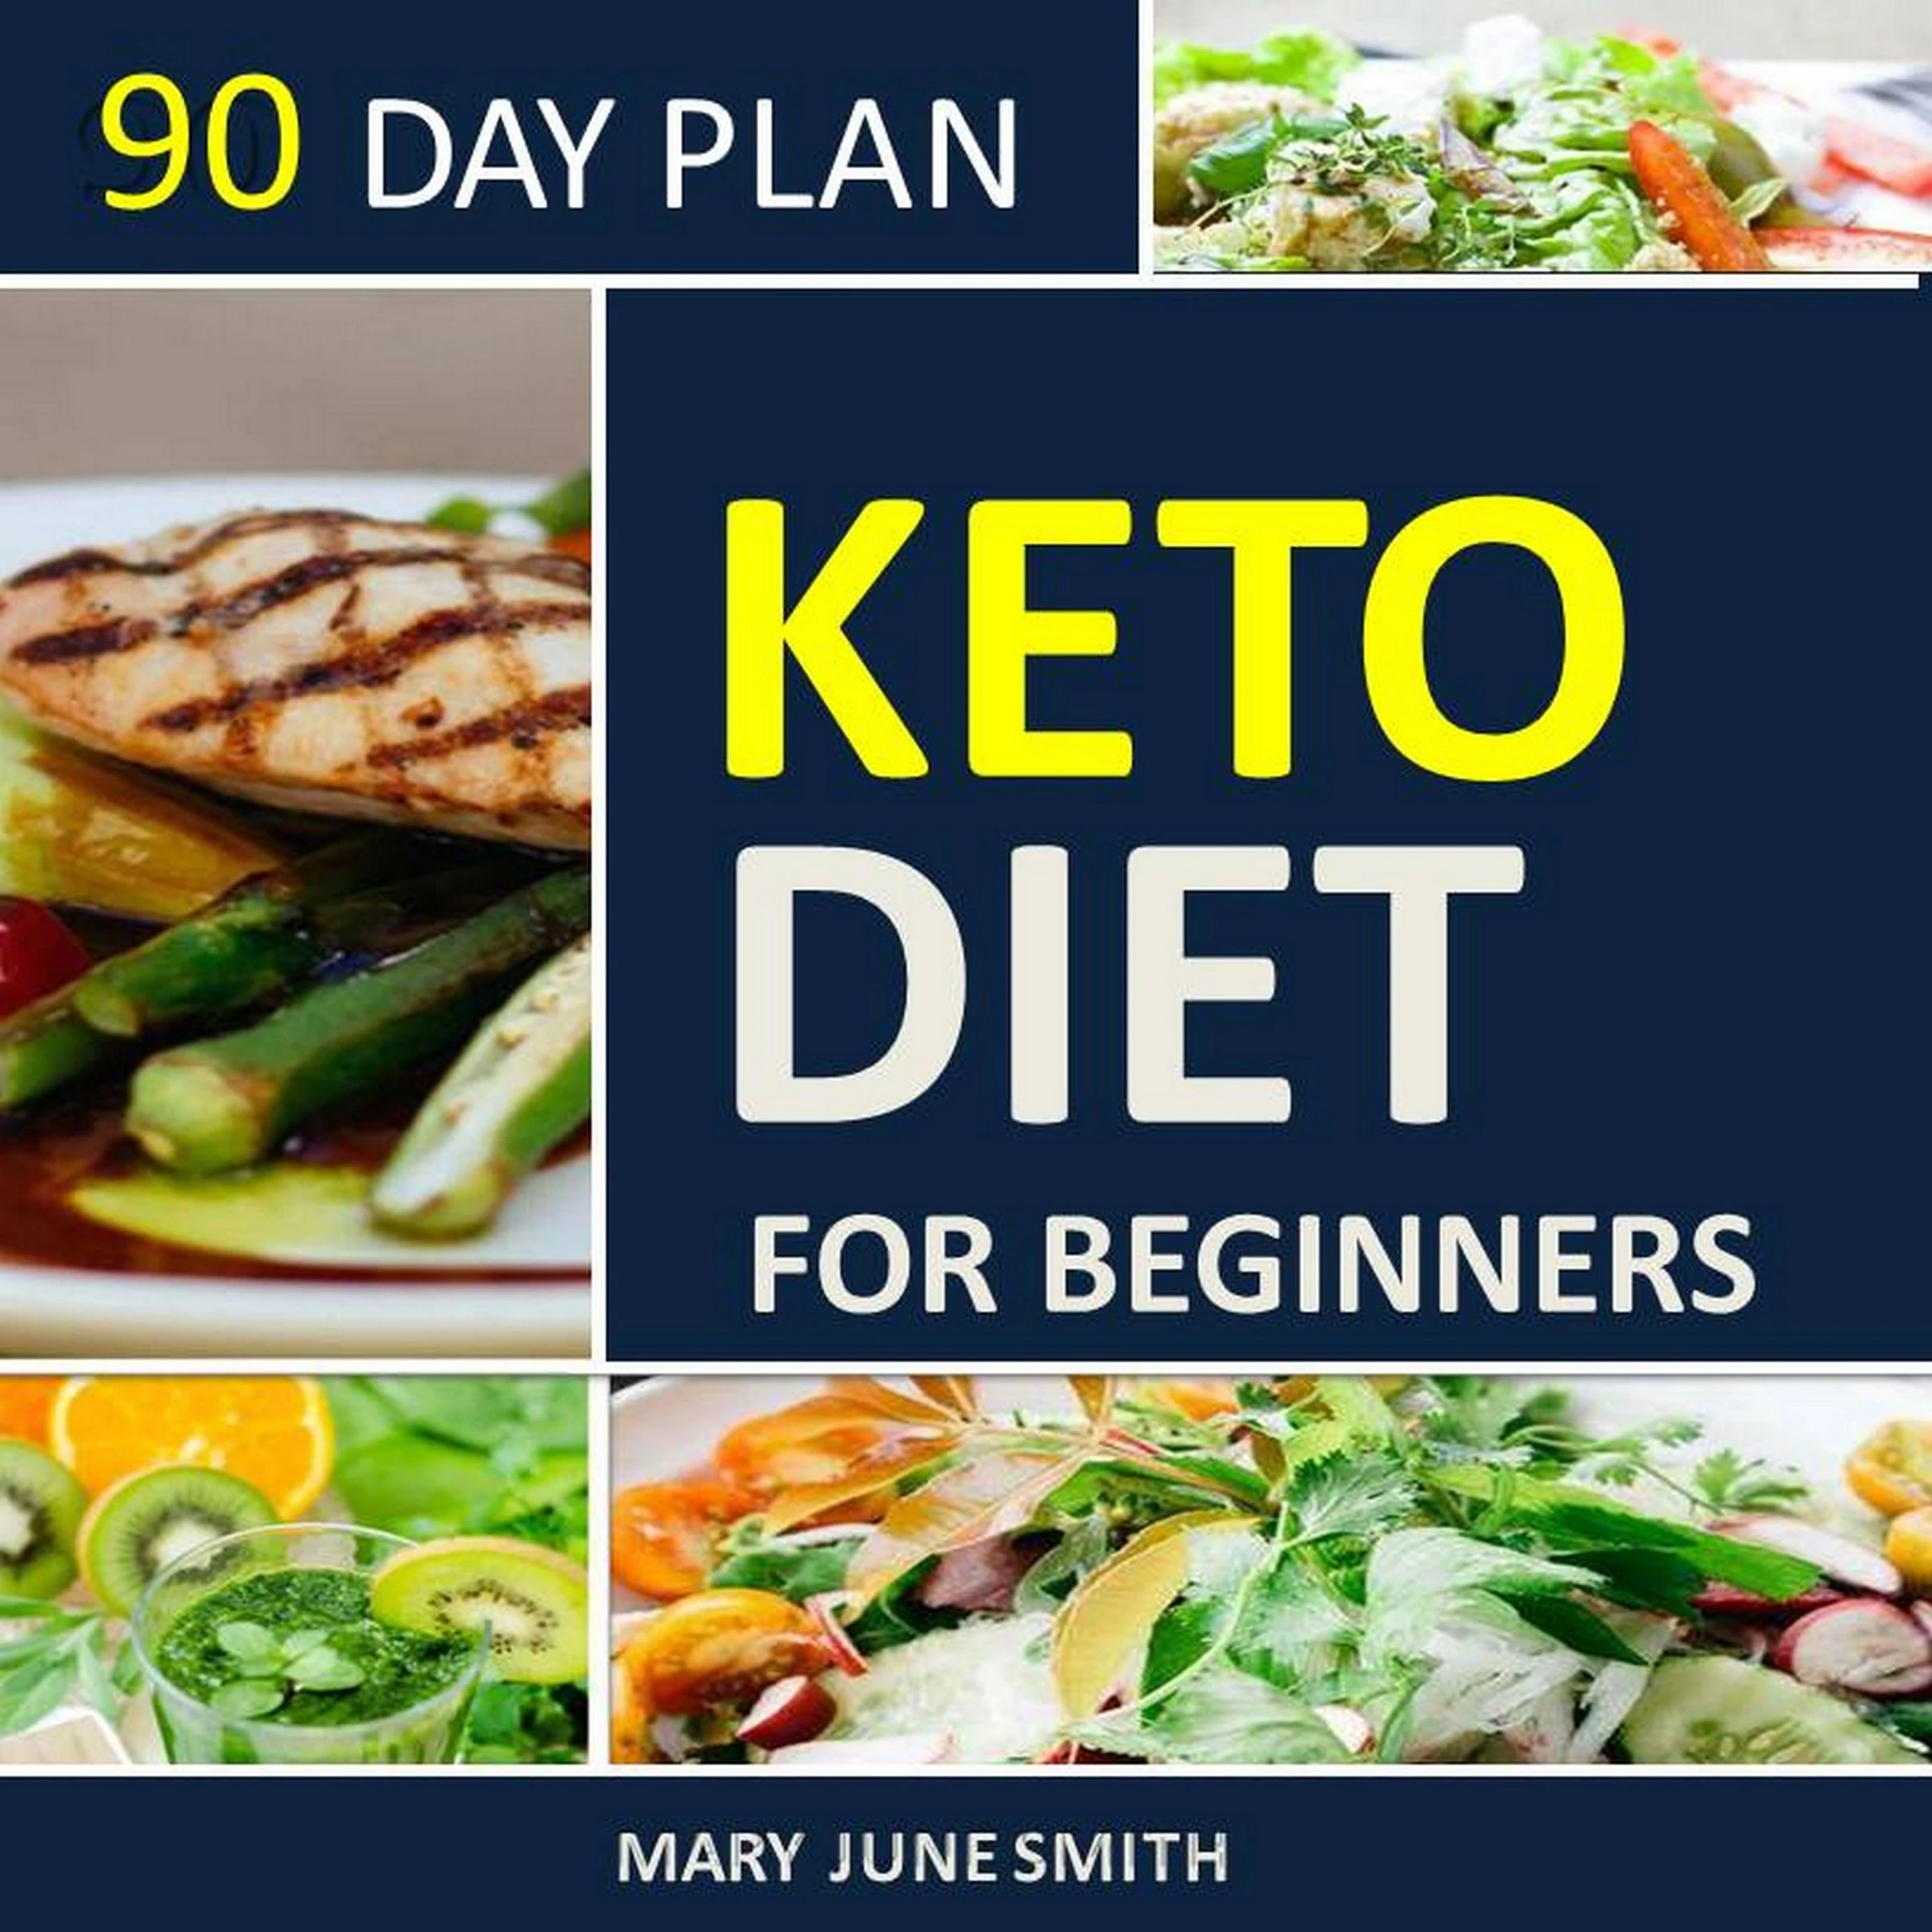 Keto Diet 90 Day Plan for Beginners (2020 Ketogenic Diet Plan) Audiobook by Mary June Smith